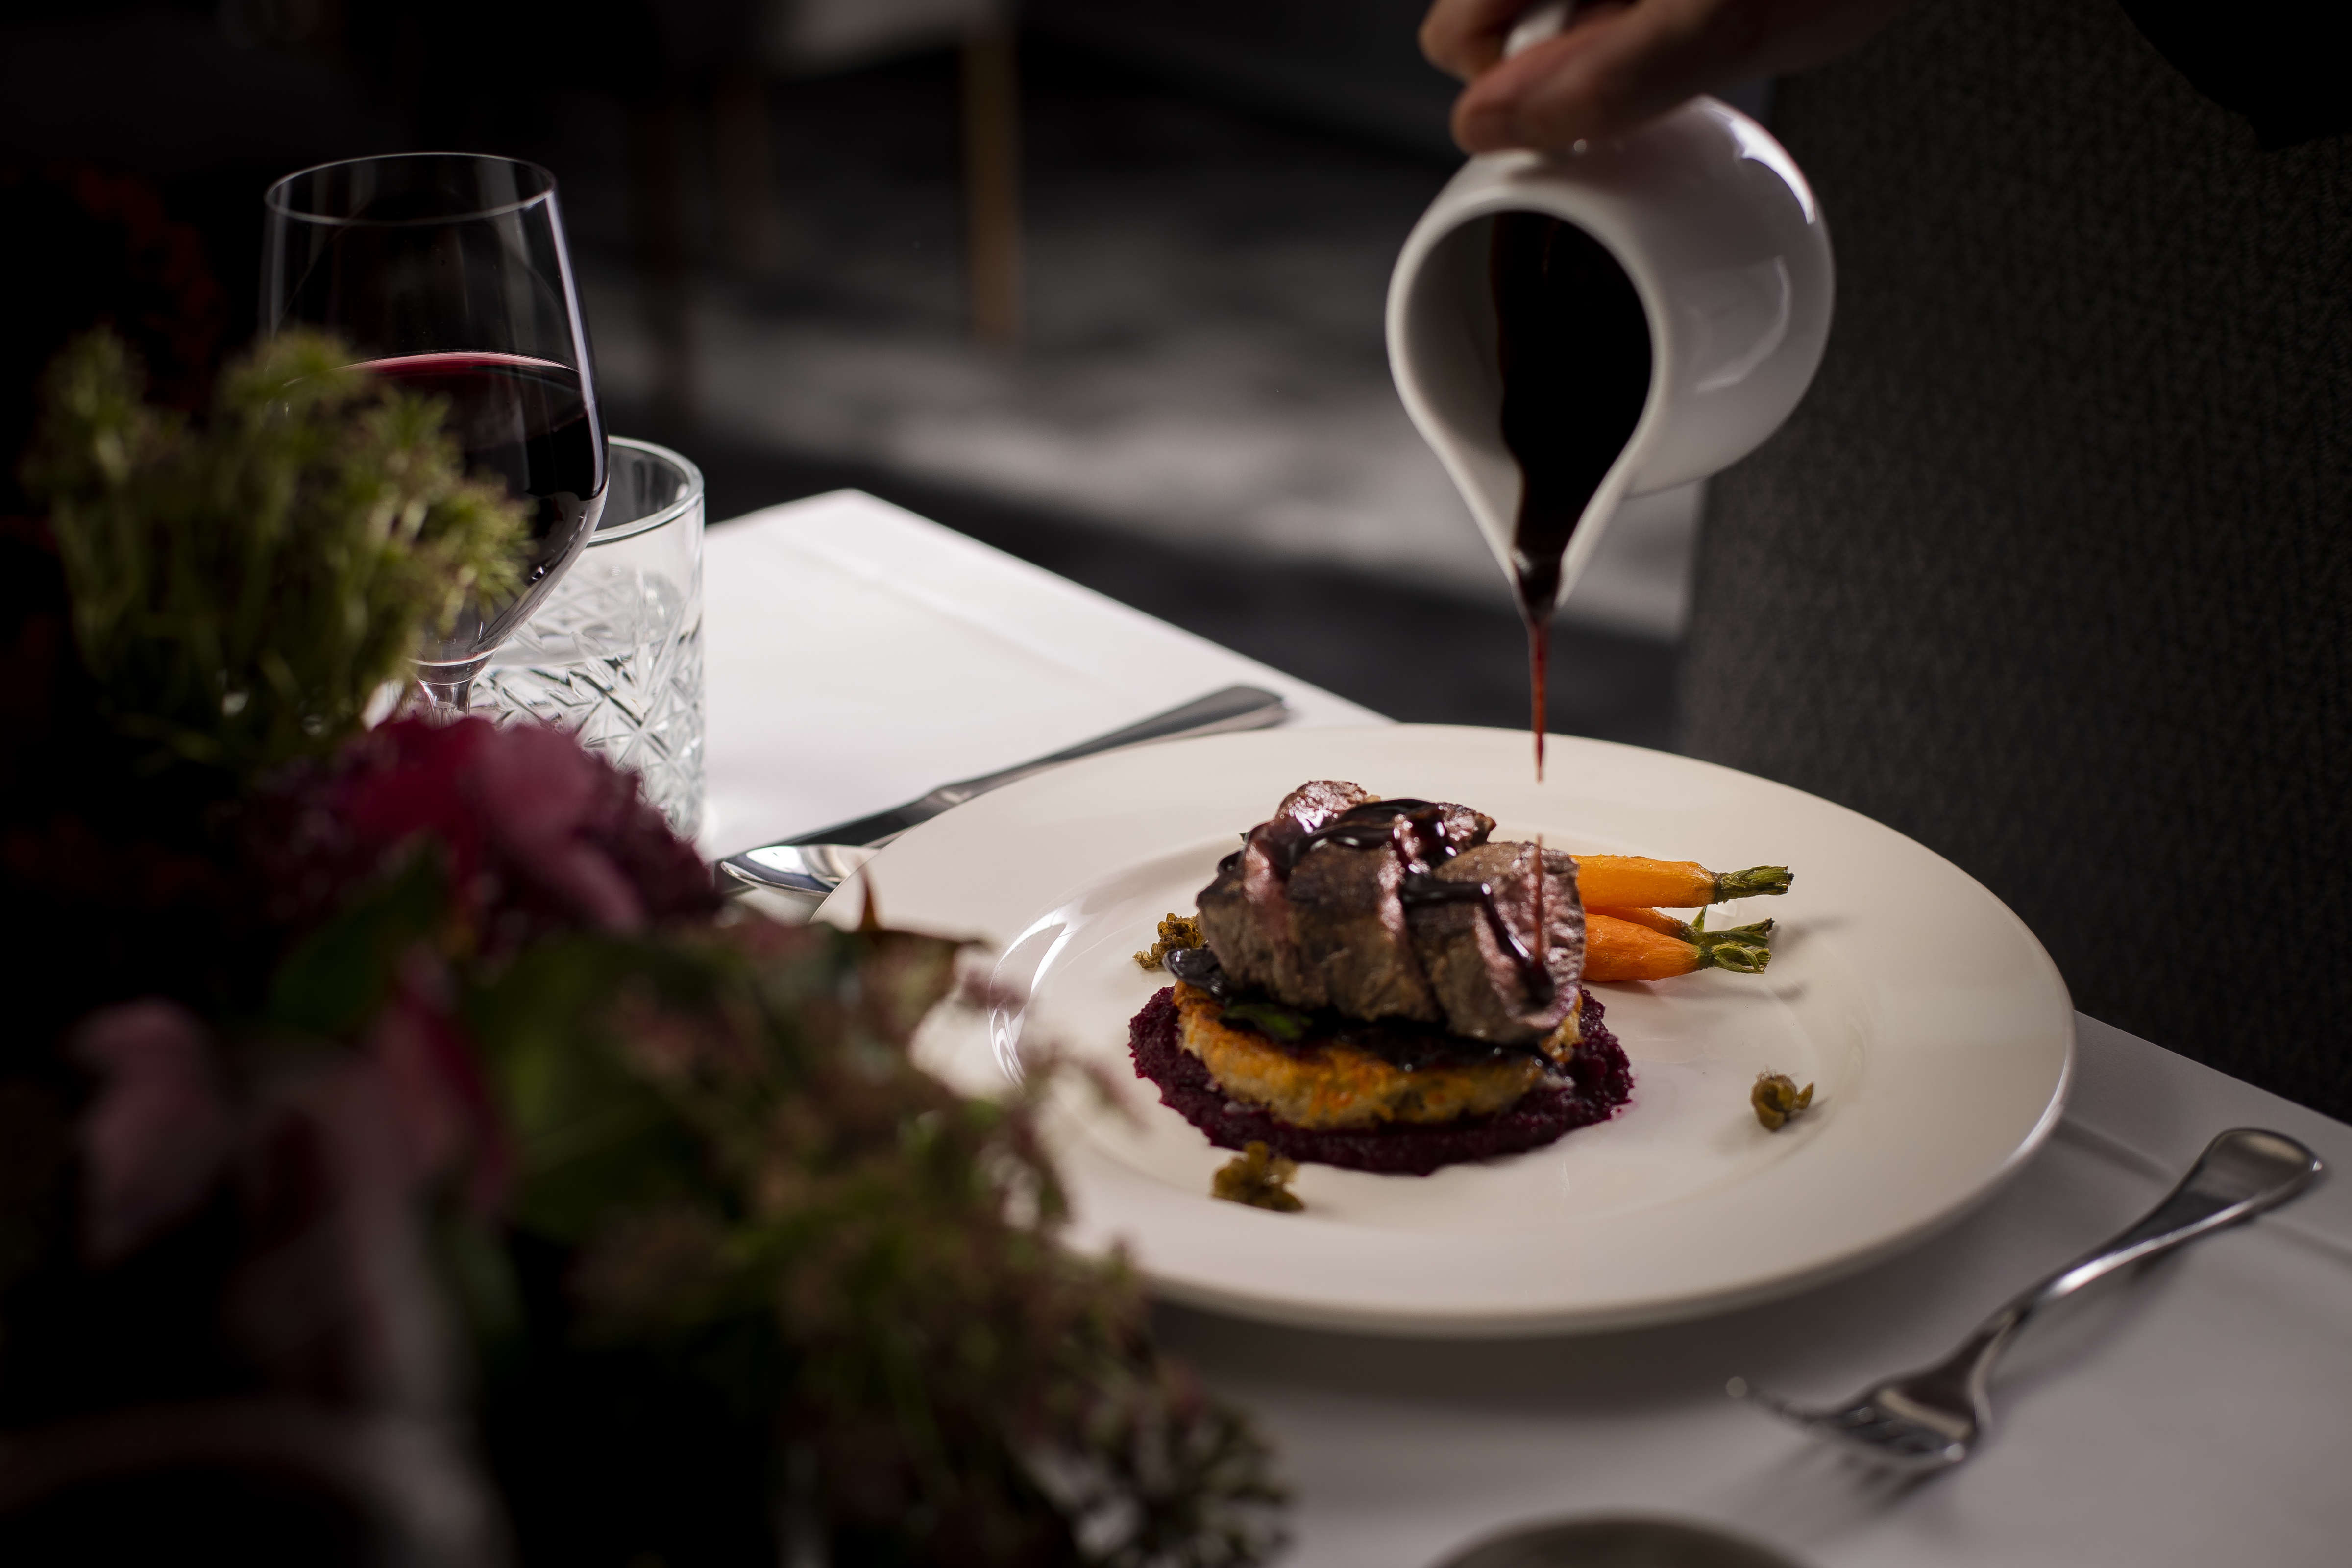 Roasted eye fillet slices on hashbrown with beetroot puree and roast baby carrots glazed with jus on a white dinner plate. Photo: Richard Jupe.